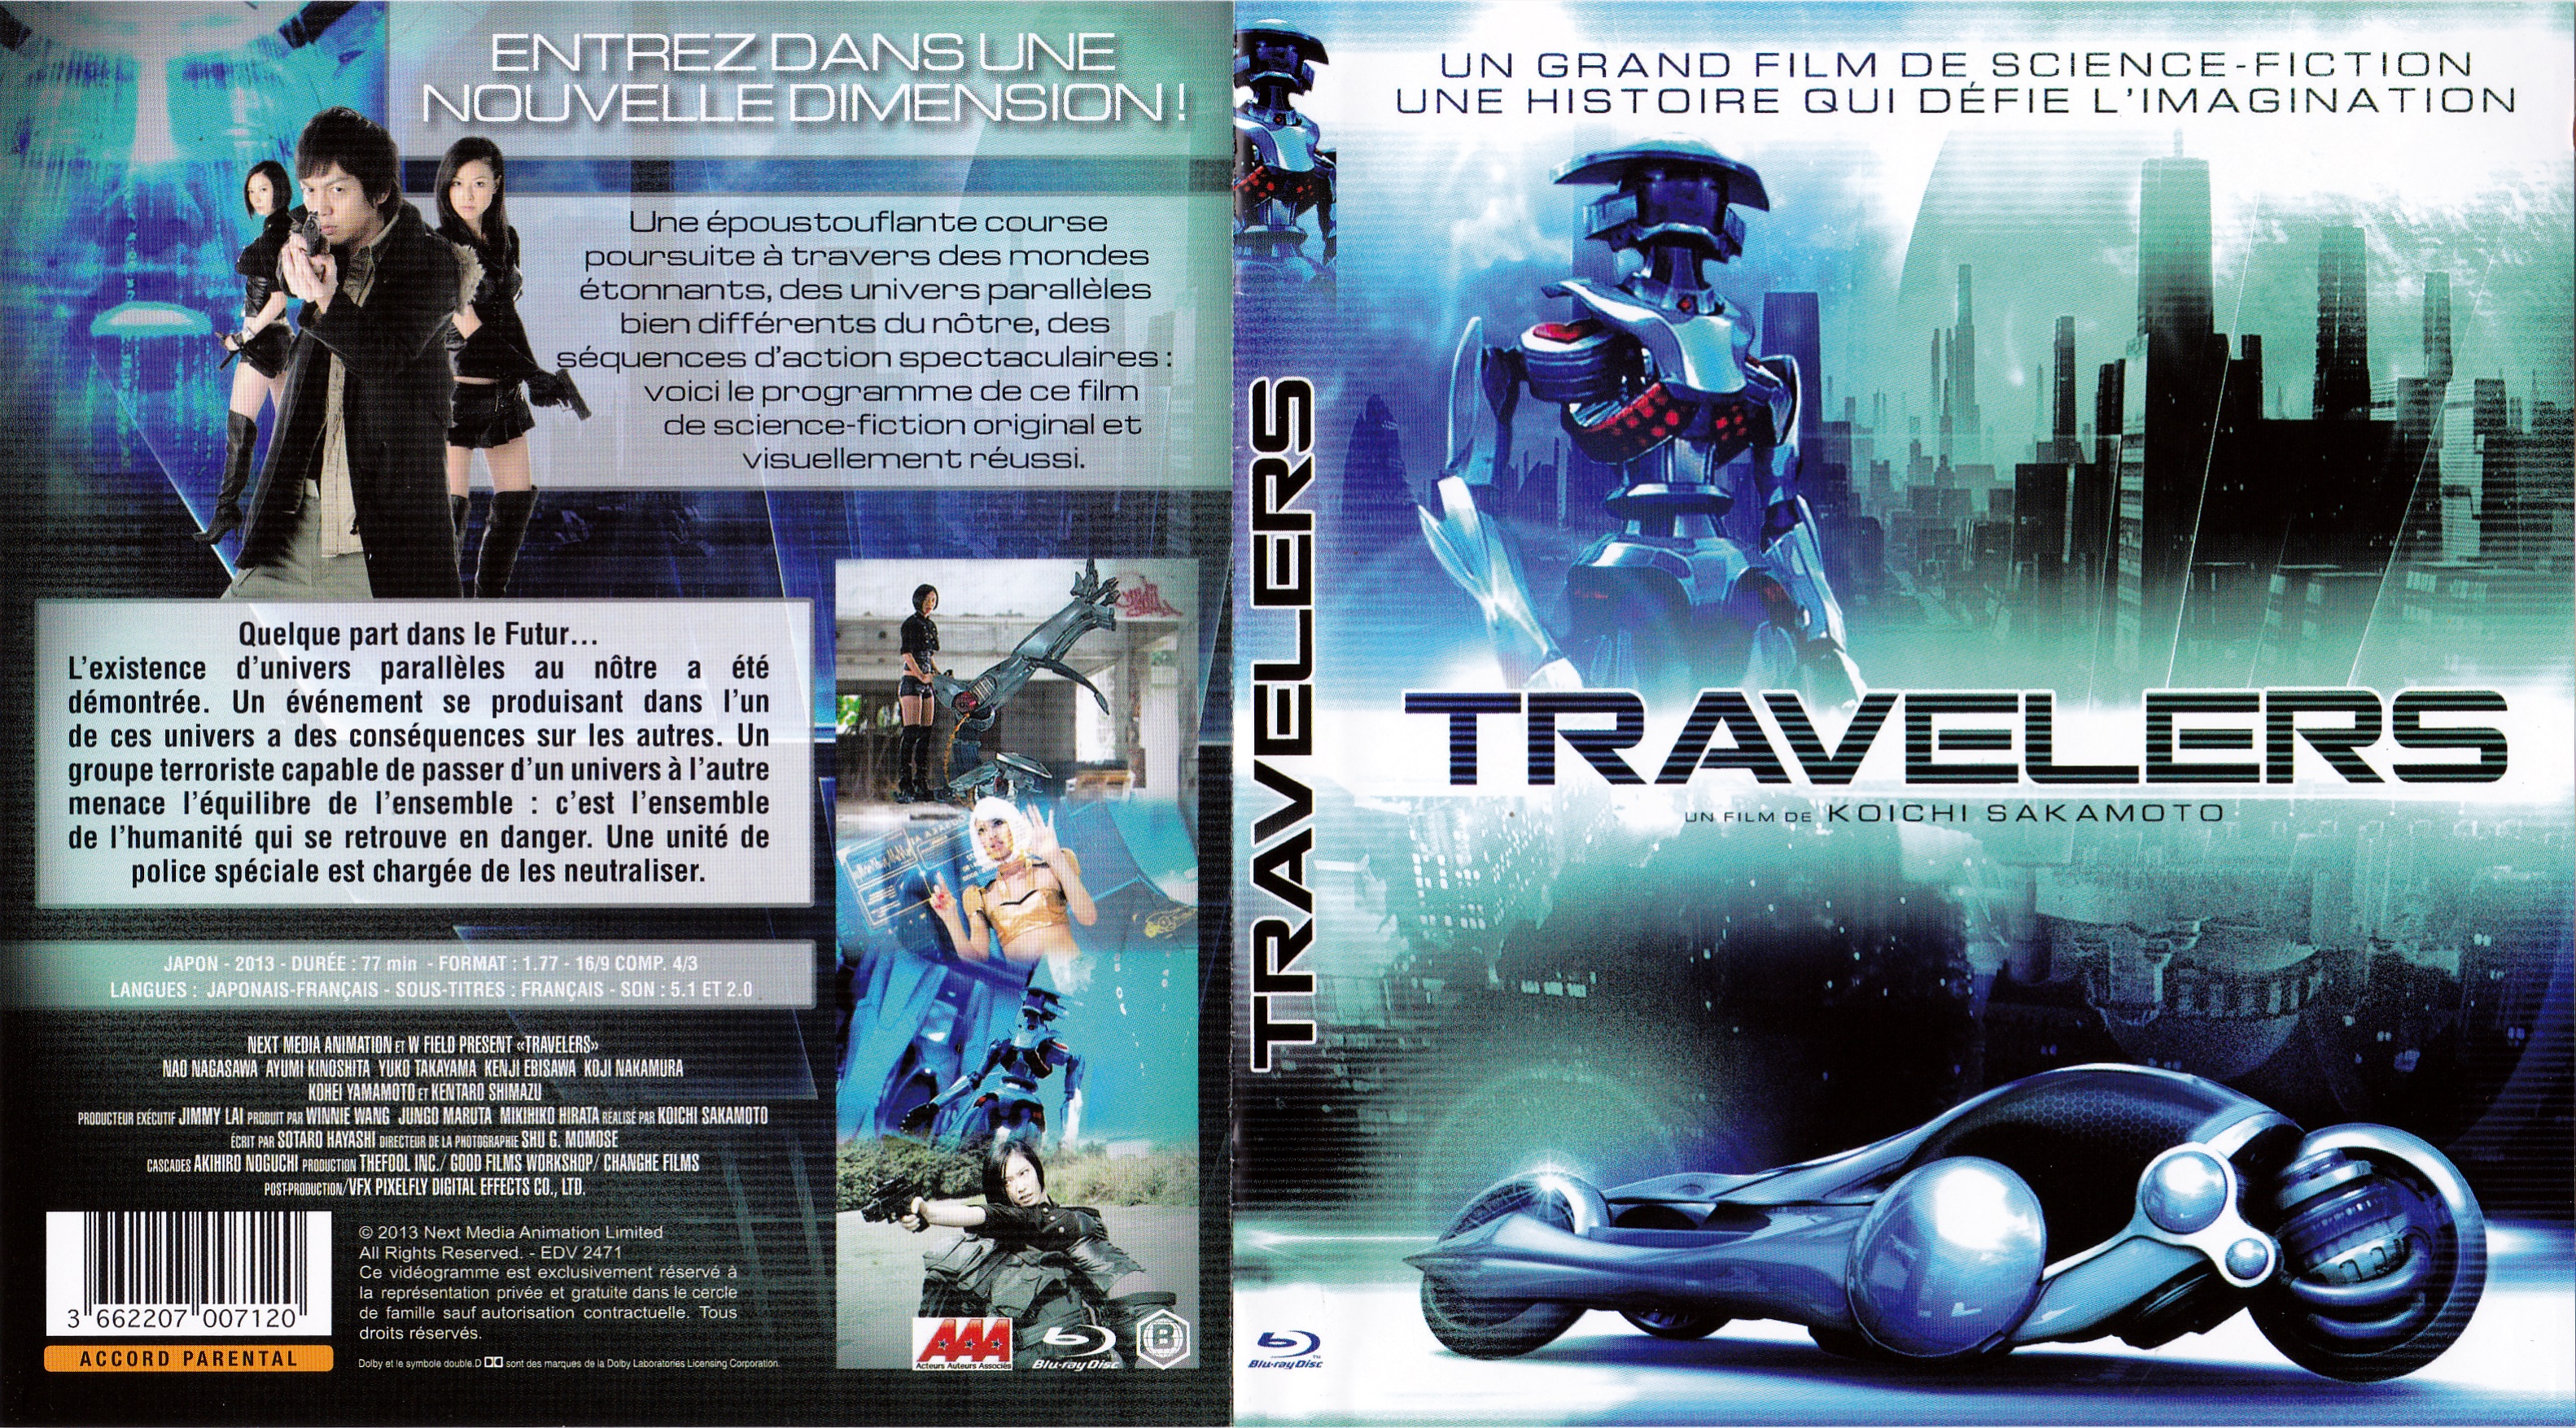 Jaquette DVD Travelers (BLU-RAY)